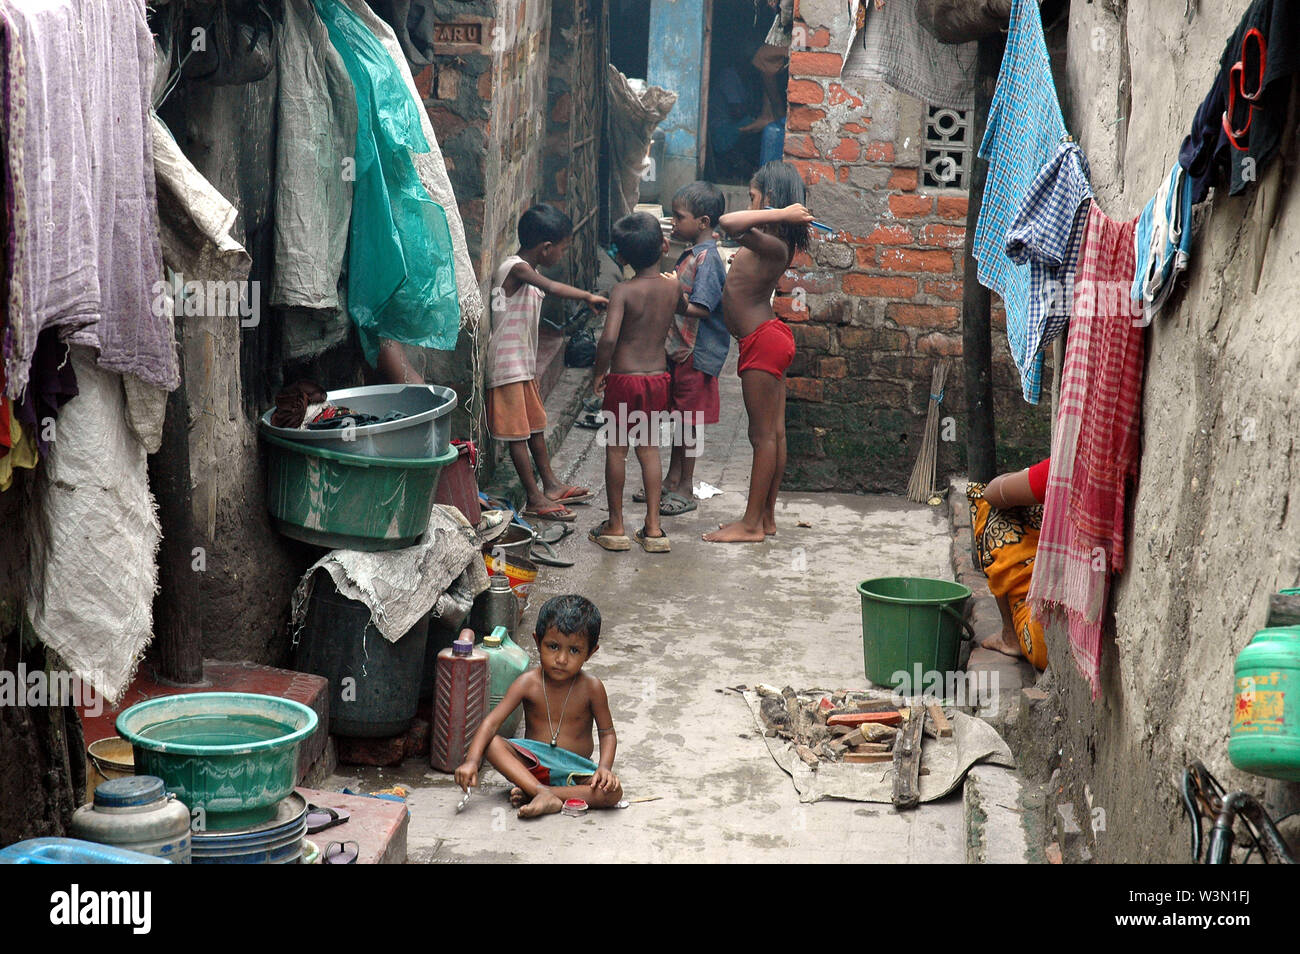 Children at a Road side slum of Kolkata city. Most of the transient roadside settlements and slums have been formed by refugees from East Pakistan. Infiltration in the city also takes place frequently from the villages of 24 Paraganas. The slum dwellers are mostly engaged as domestic servants, sweepers, daily laborers, small traders etc. India. July 17, 2005. Stock Photo